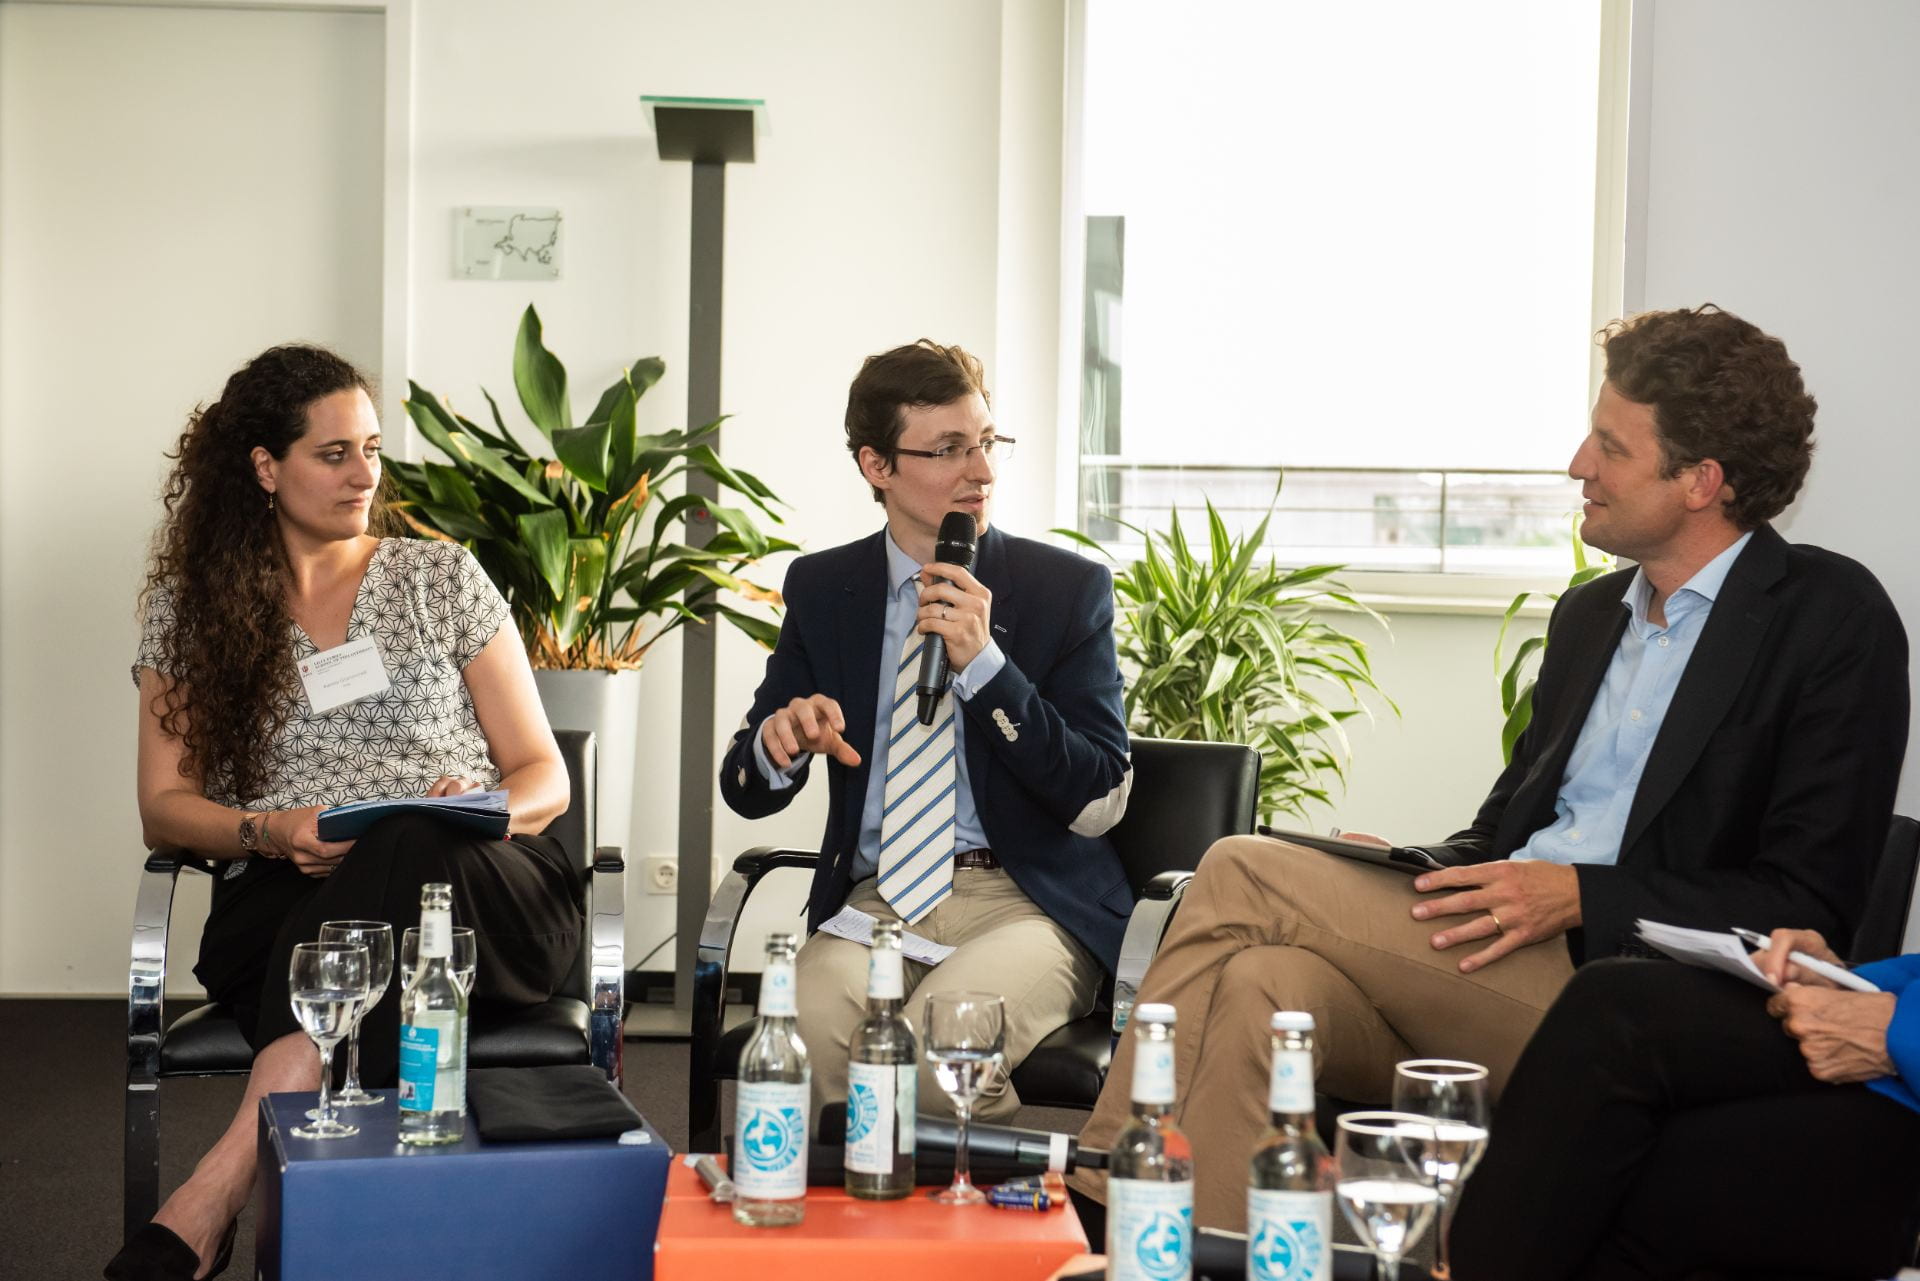 Dr. Charles Sellen discusses global philanthropy at the European launch of the Global Philanthropy Environment Index in June 2018.